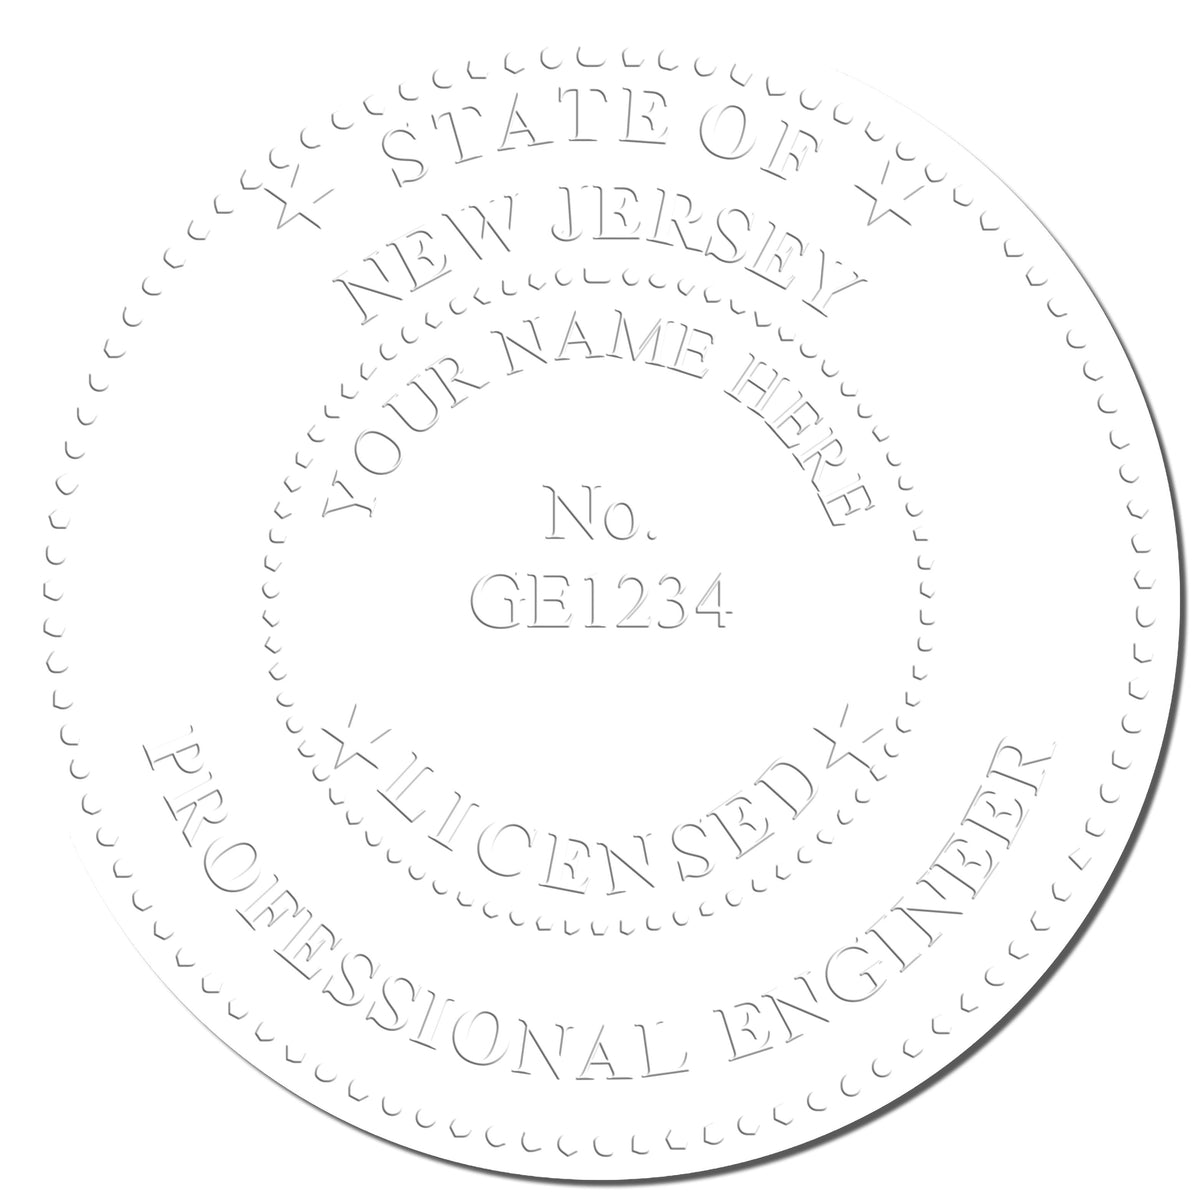 This paper is stamped with a sample imprint of the Hybrid New Jersey Engineer Seal, signifying its quality and reliability.